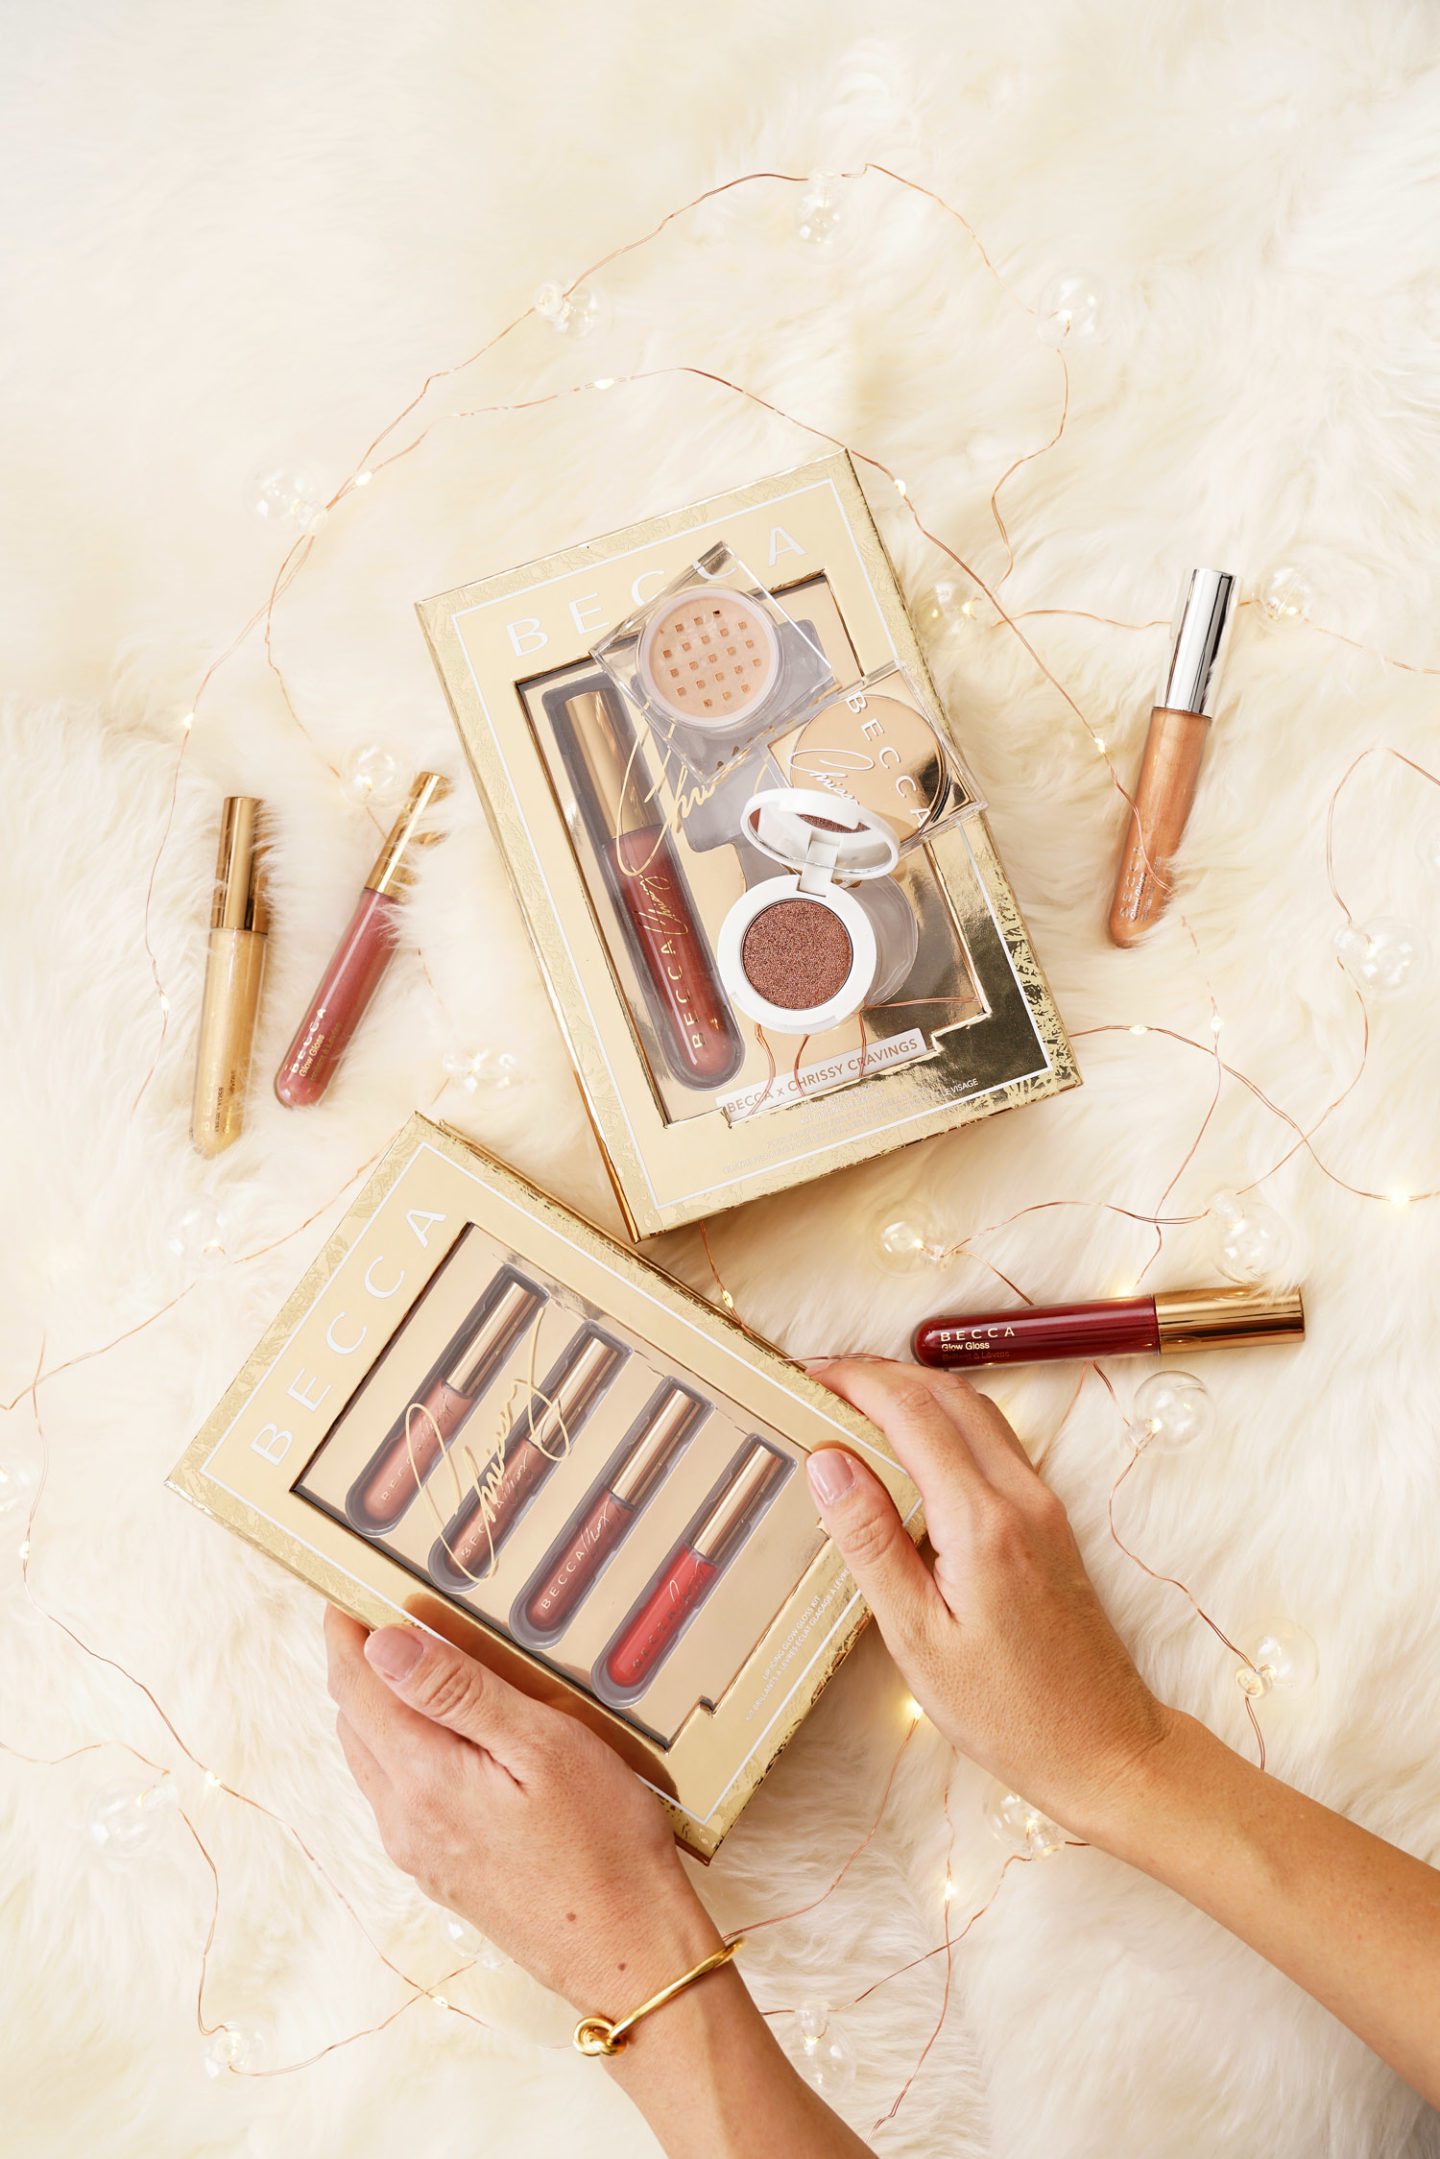 Becca x Chrissy Teigen Holiday Collection Review + Swatches 